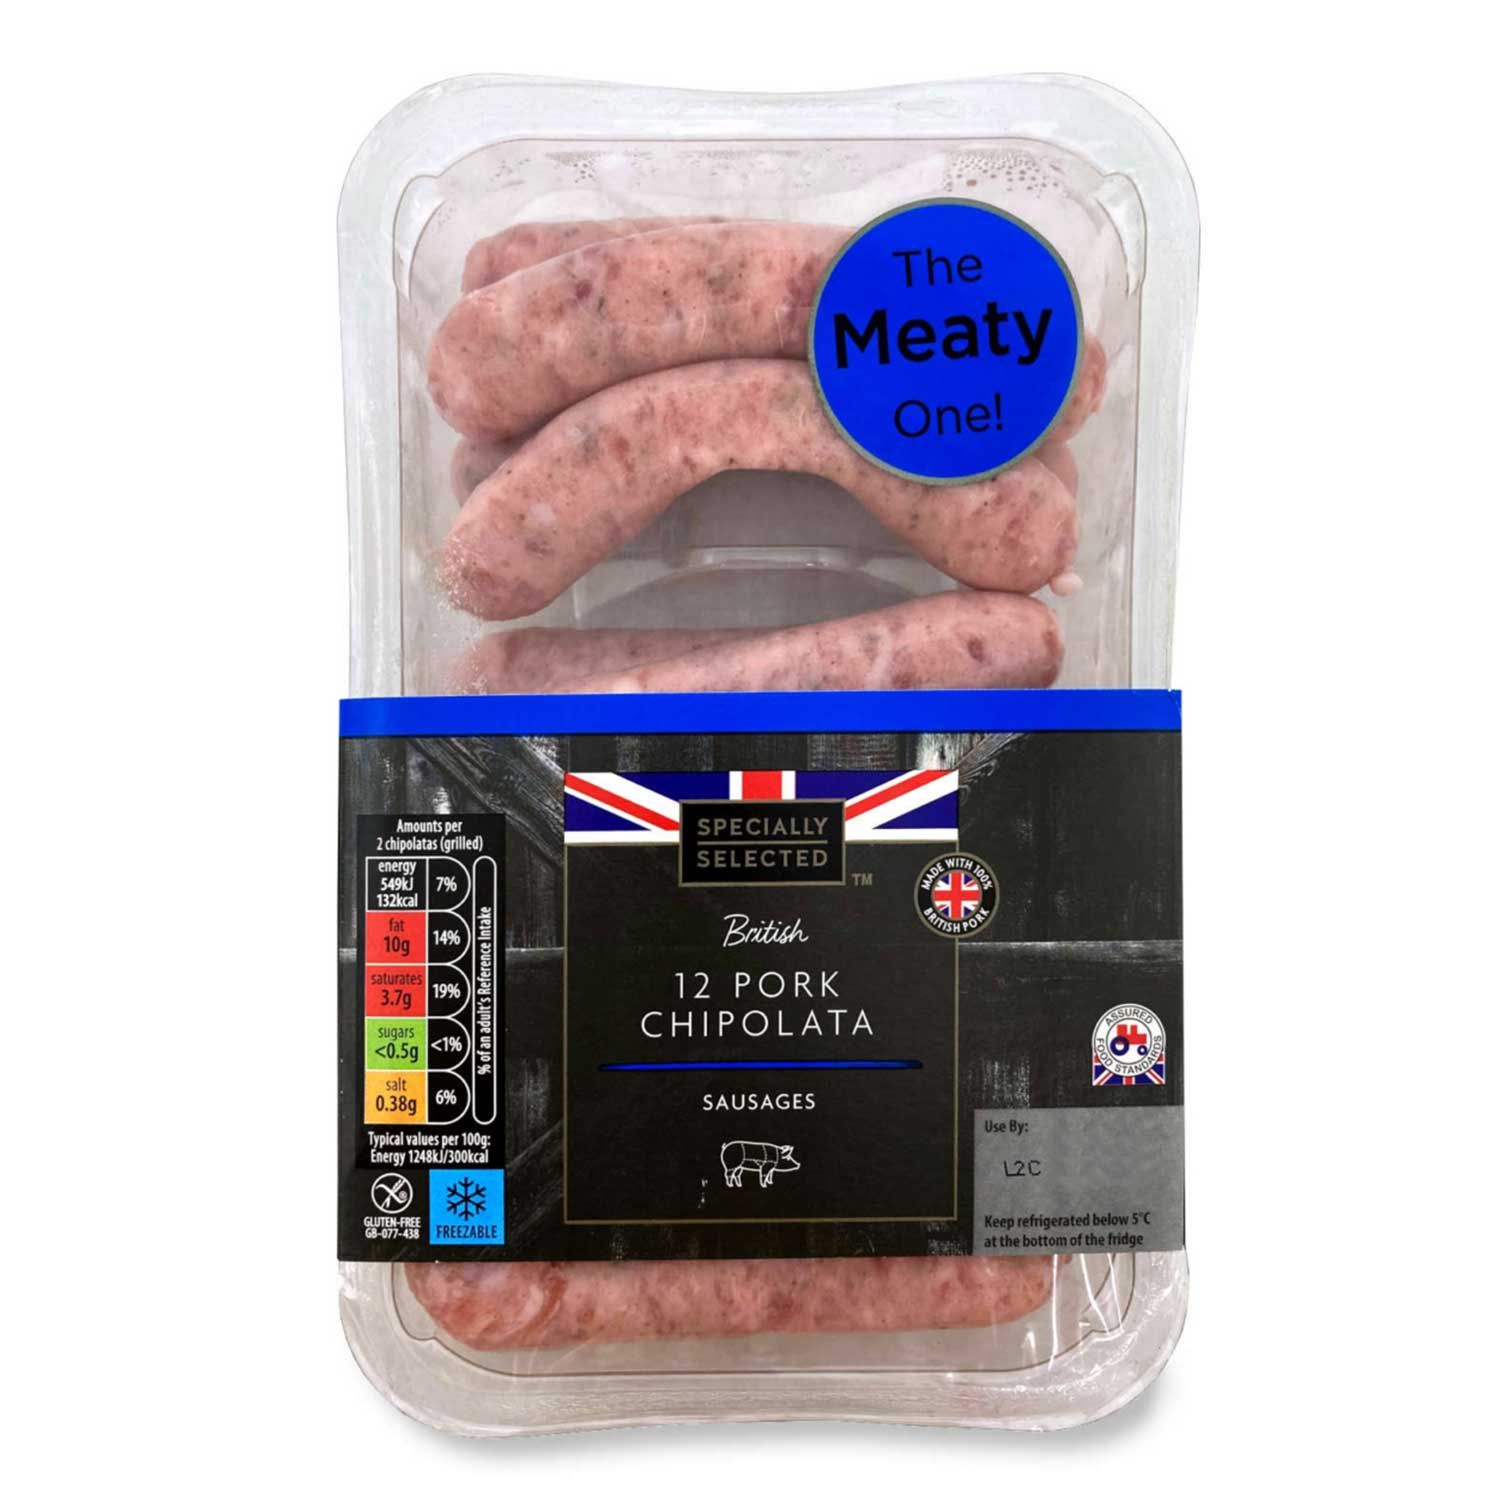 Specially Selected British Pork Chipolata Sausages 375g12 Pack Aldi 0343